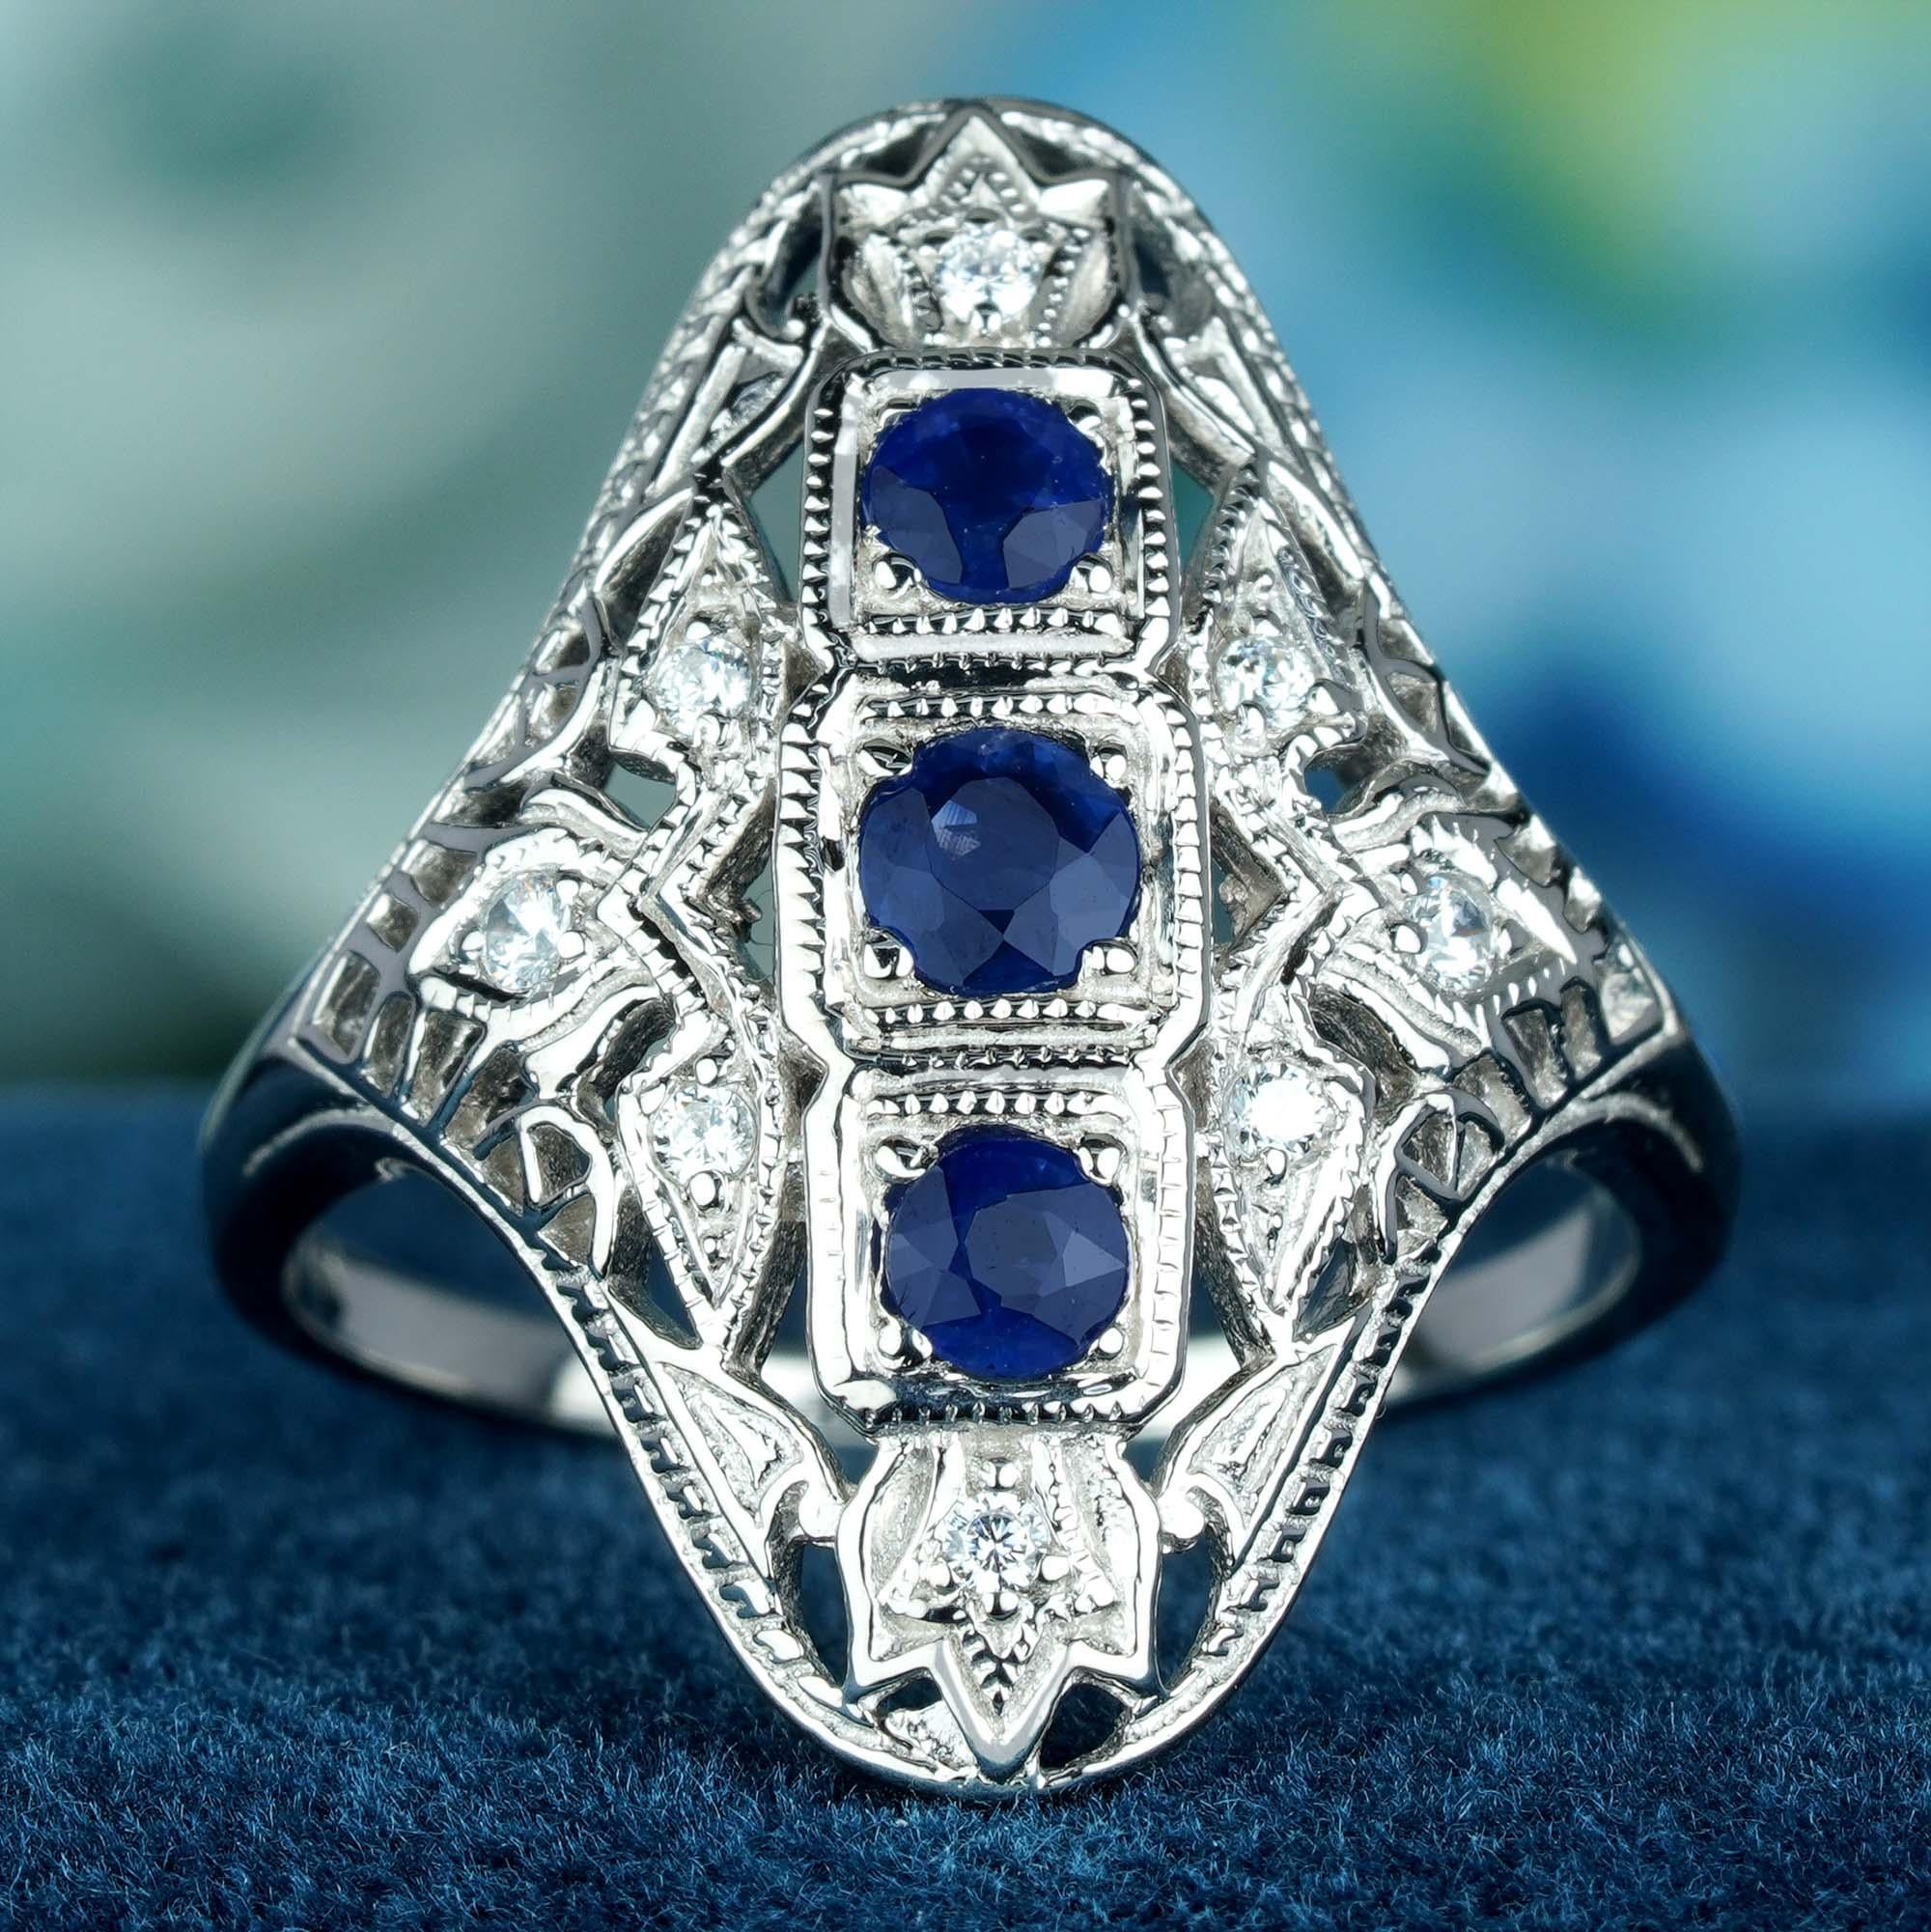 This Art Deco vintage-style ring features a central 3 cascading cluster of round blue sapphire set in a raised bezel, with delicate filigree work adorning the solid white gold band and shoulders adds a touch of femininity and romance to the ring.